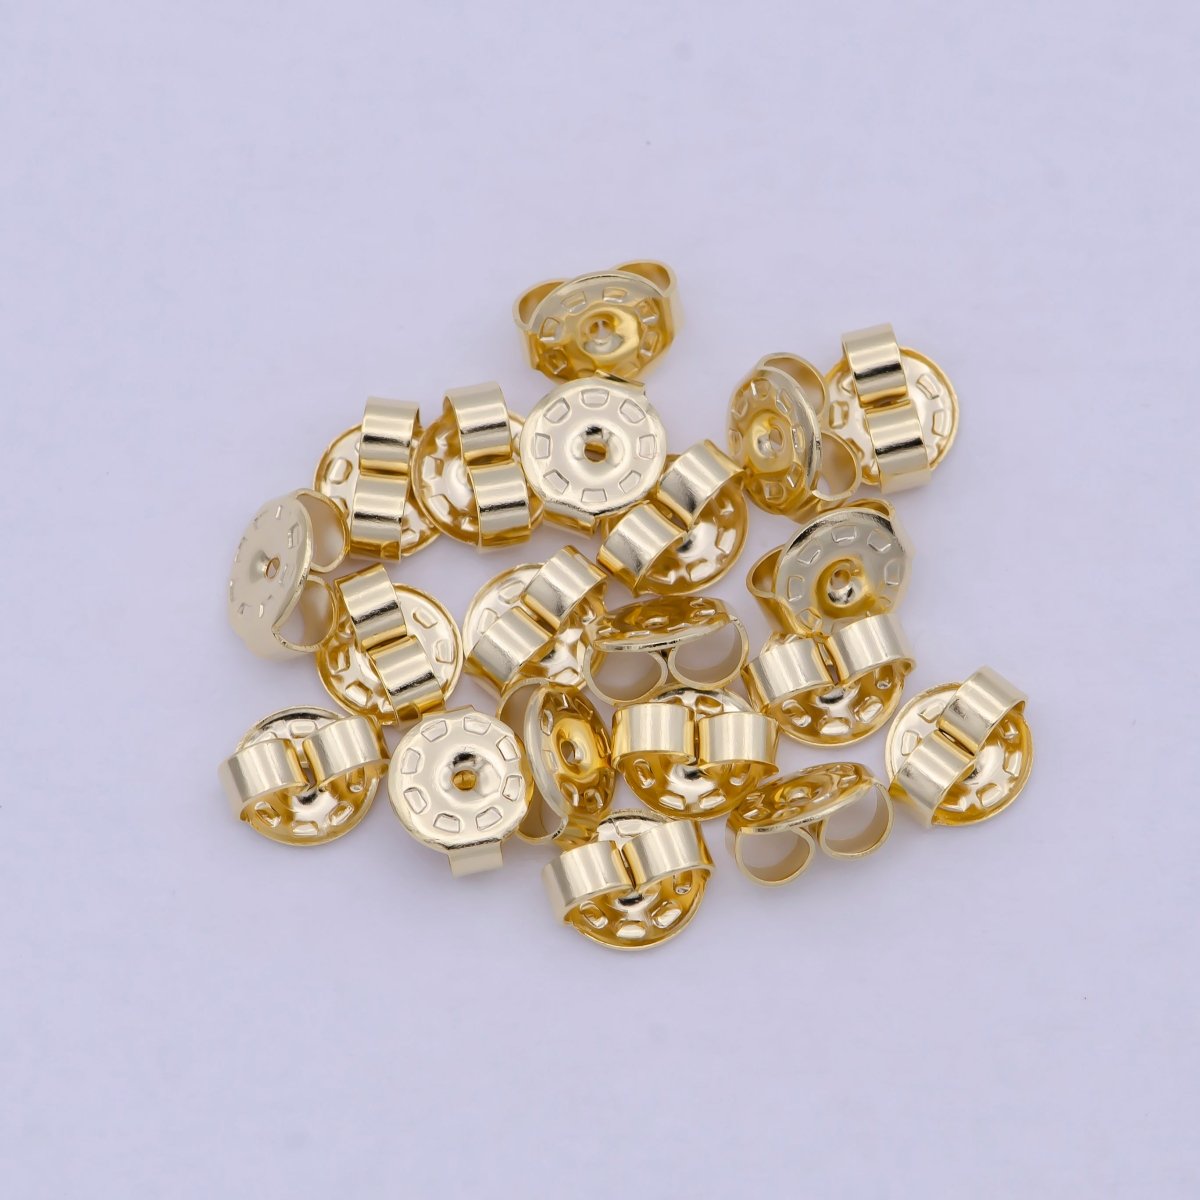 Gold Earring Backs for Studs Hypoallergenic Earring Backs Replacements Posts for Diamond Studs Droopy Secure Locking Earring Backs, 5mm K-353 - DLUXCA